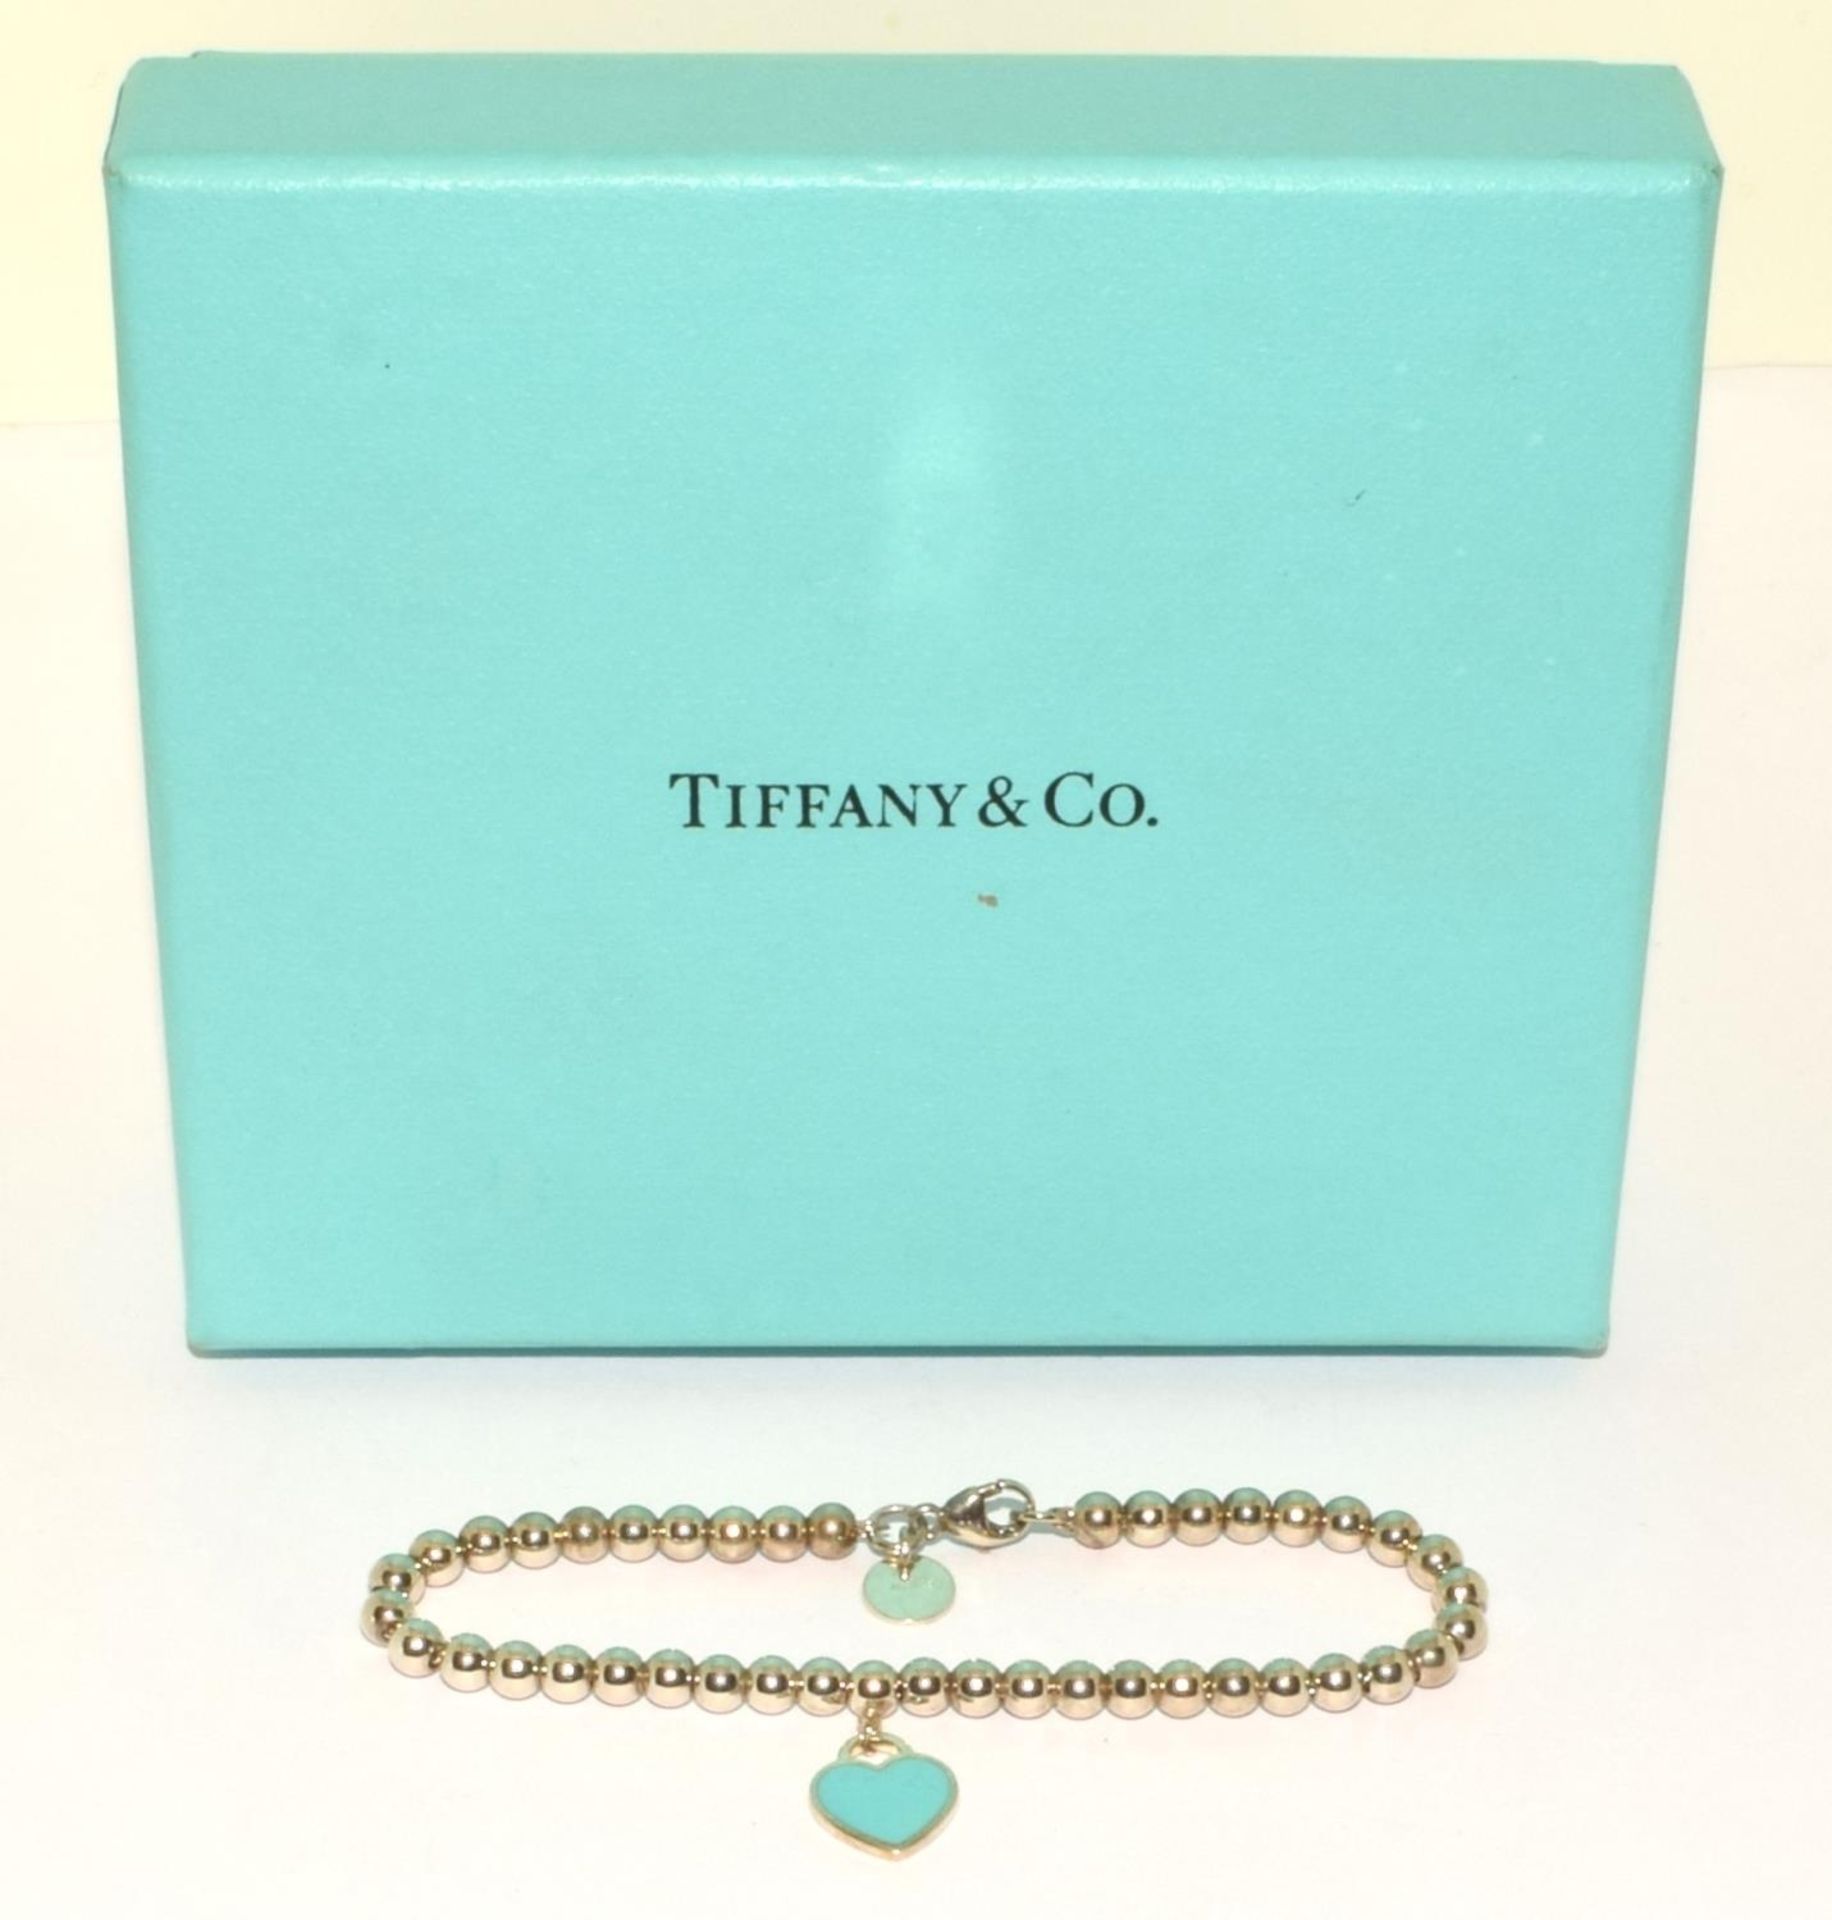 Tiffany and co silver bracelet boxed